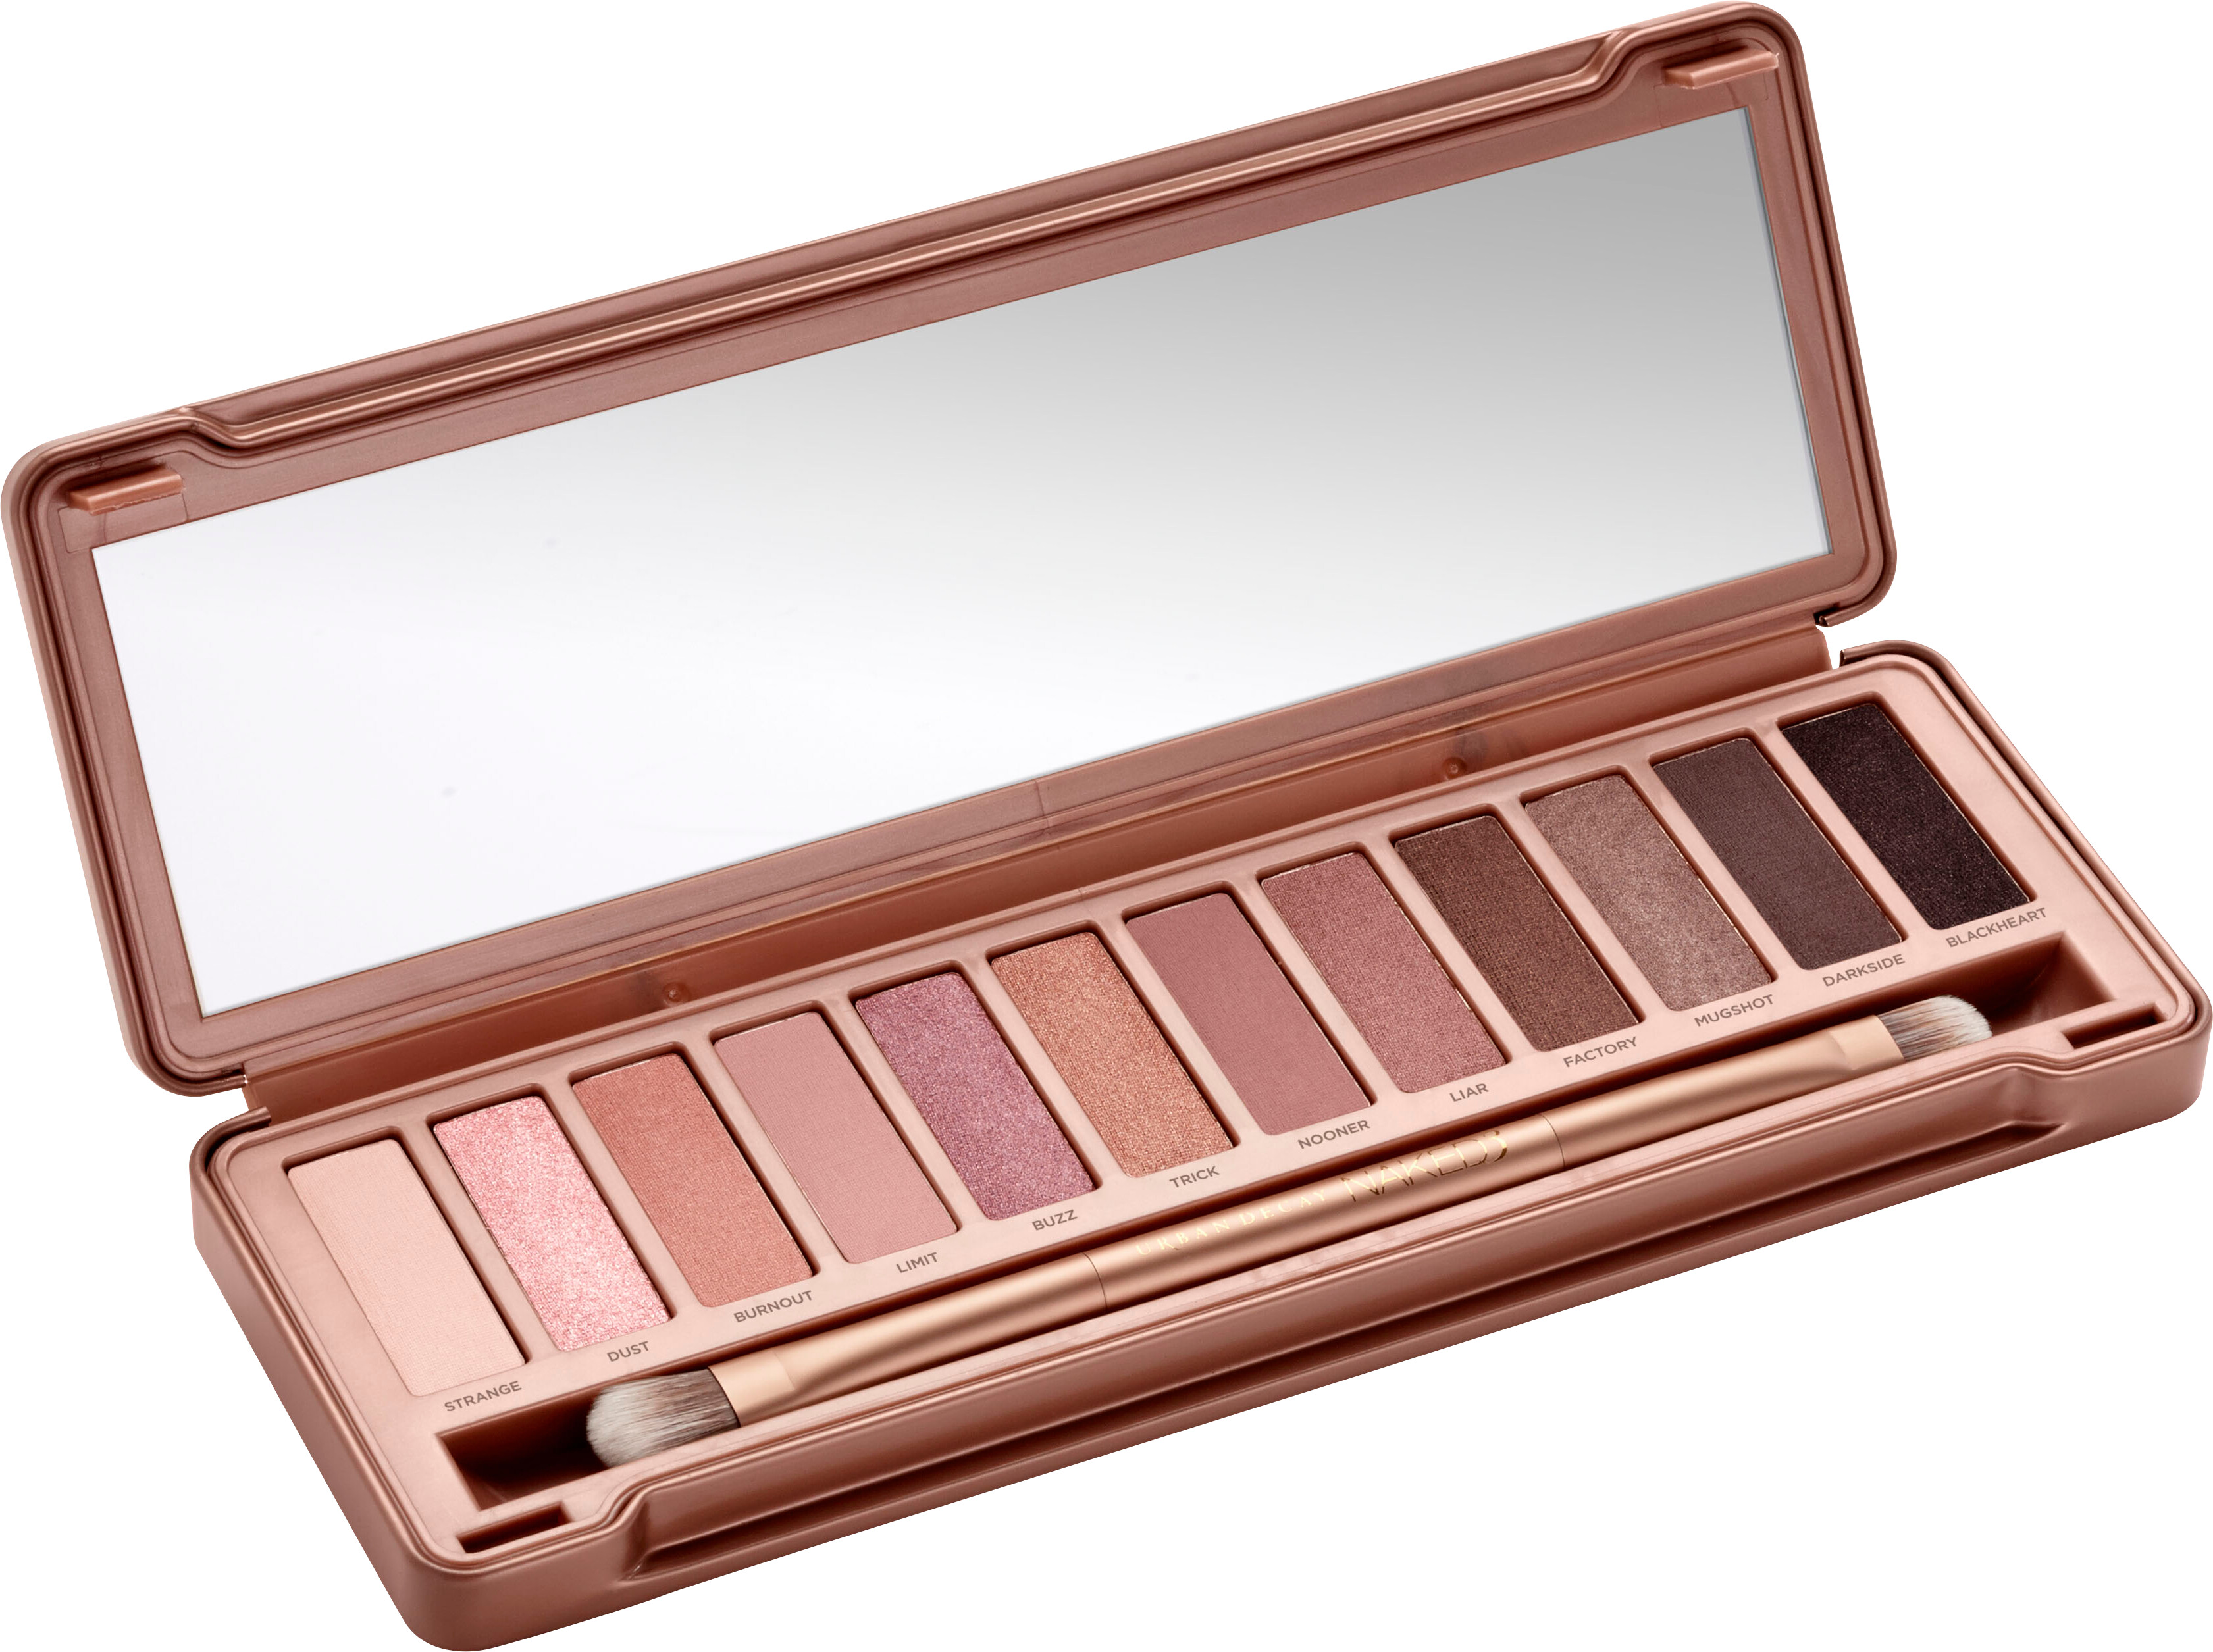 Urban Decay Naked 3 Palette | Its Back! Urban Decay 